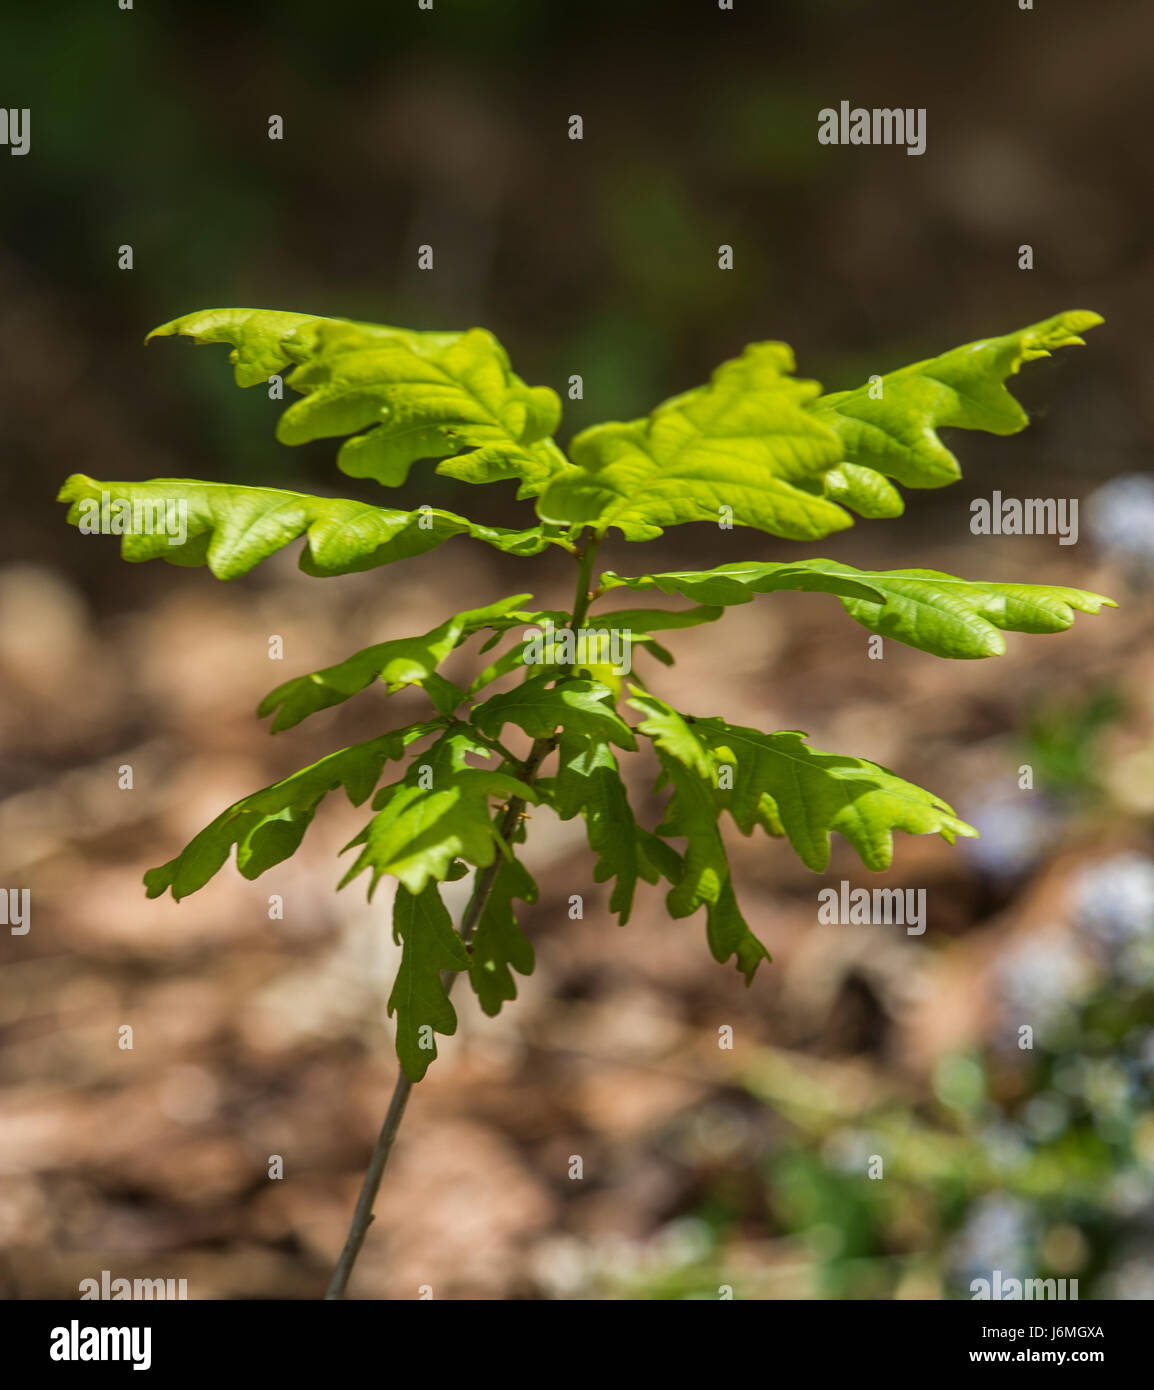 Young seedling Quercus robur, commonly known as pedunculate oak, European oak or English oak Stock Photo